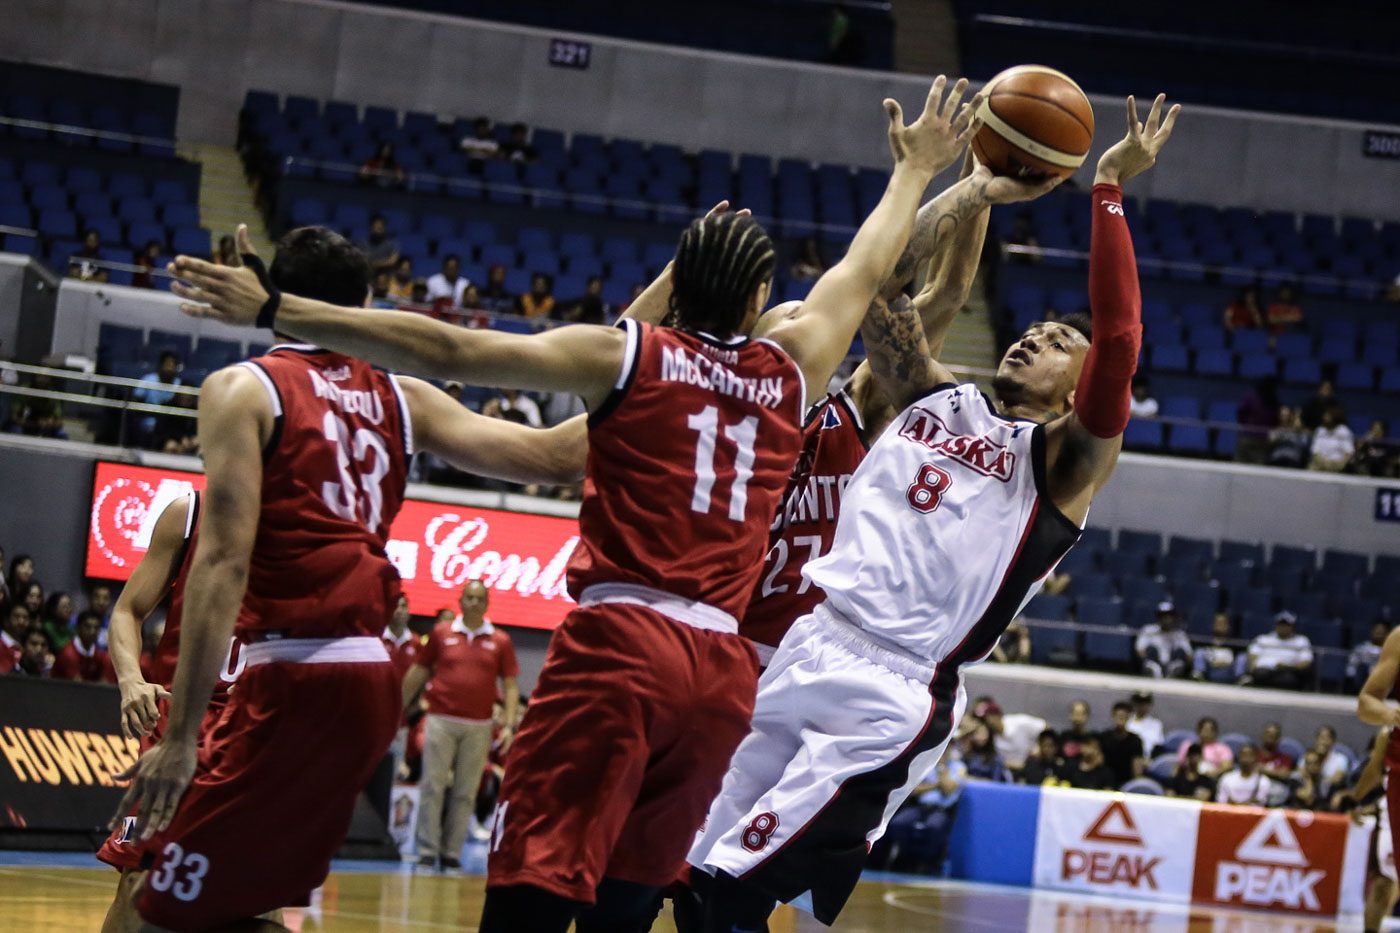 Kia makes history with 16th straight loss after 37-point drubbing from Alaska